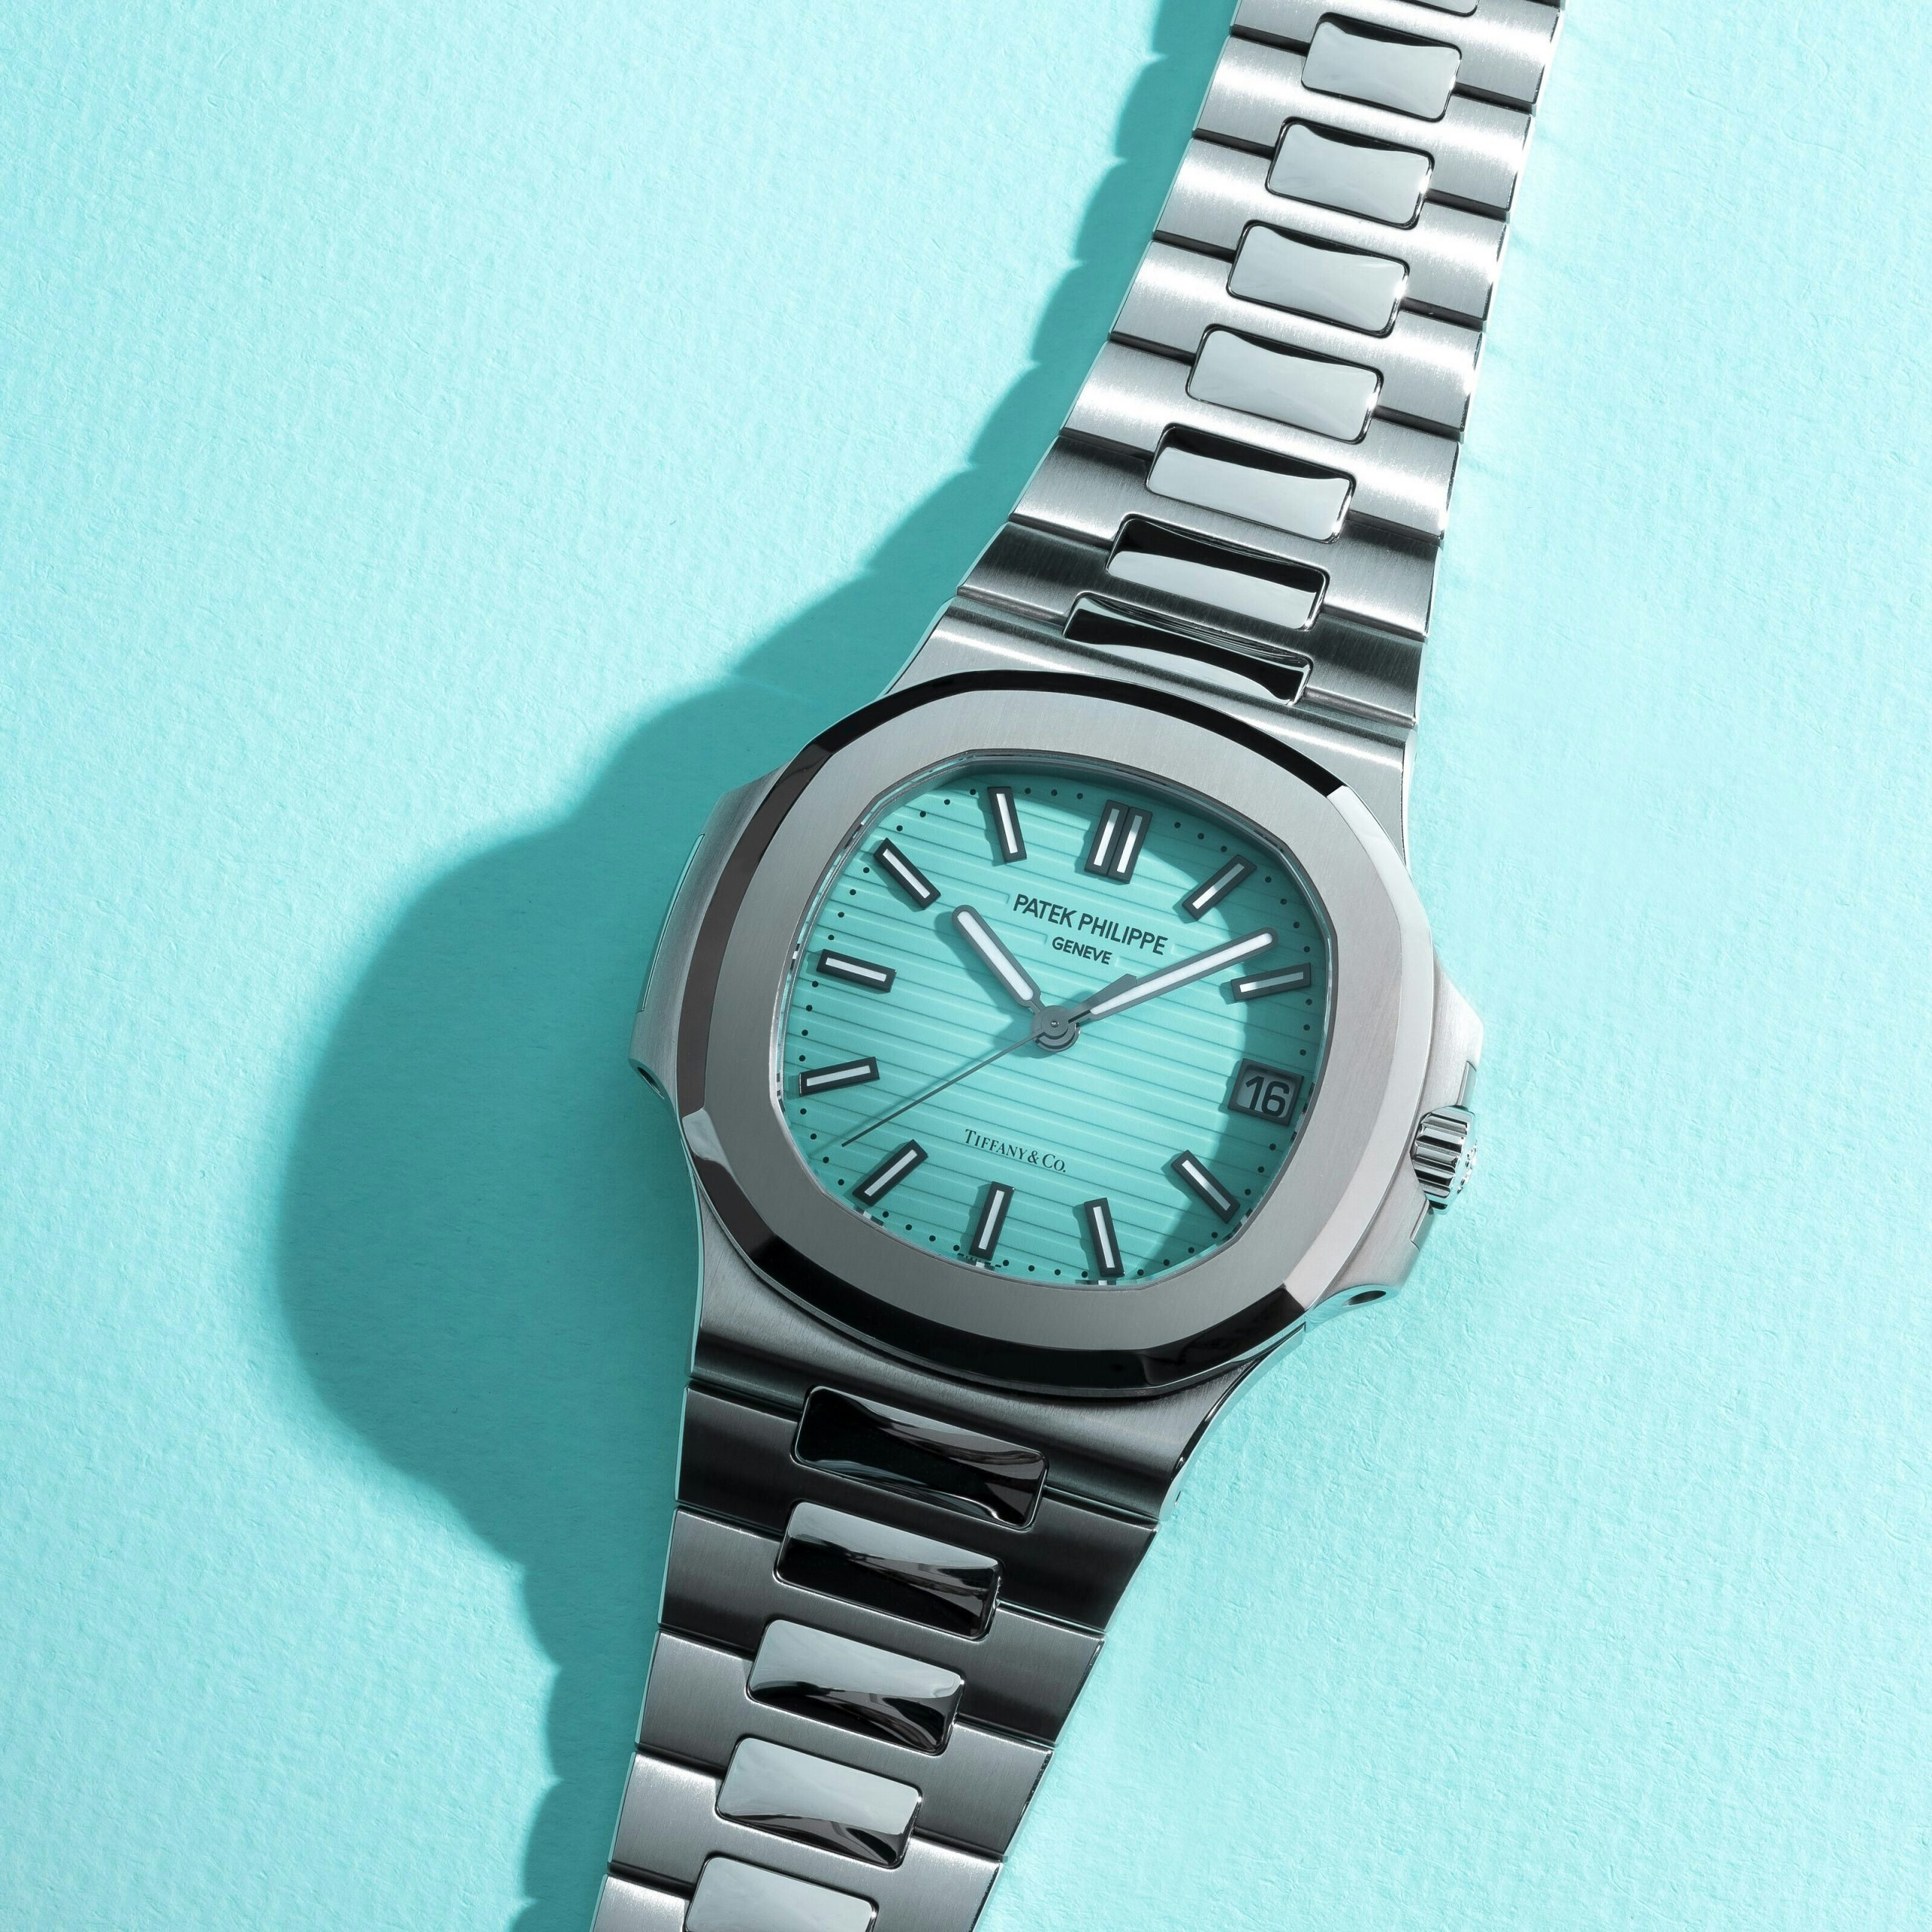 Marking the success of their long-term partnership, Tiffany & Co. and Patek Philippe launched the 5711/1A-018 Nautilus wristwatches, crafted from steel and endowed with Tiffany Blue dials.